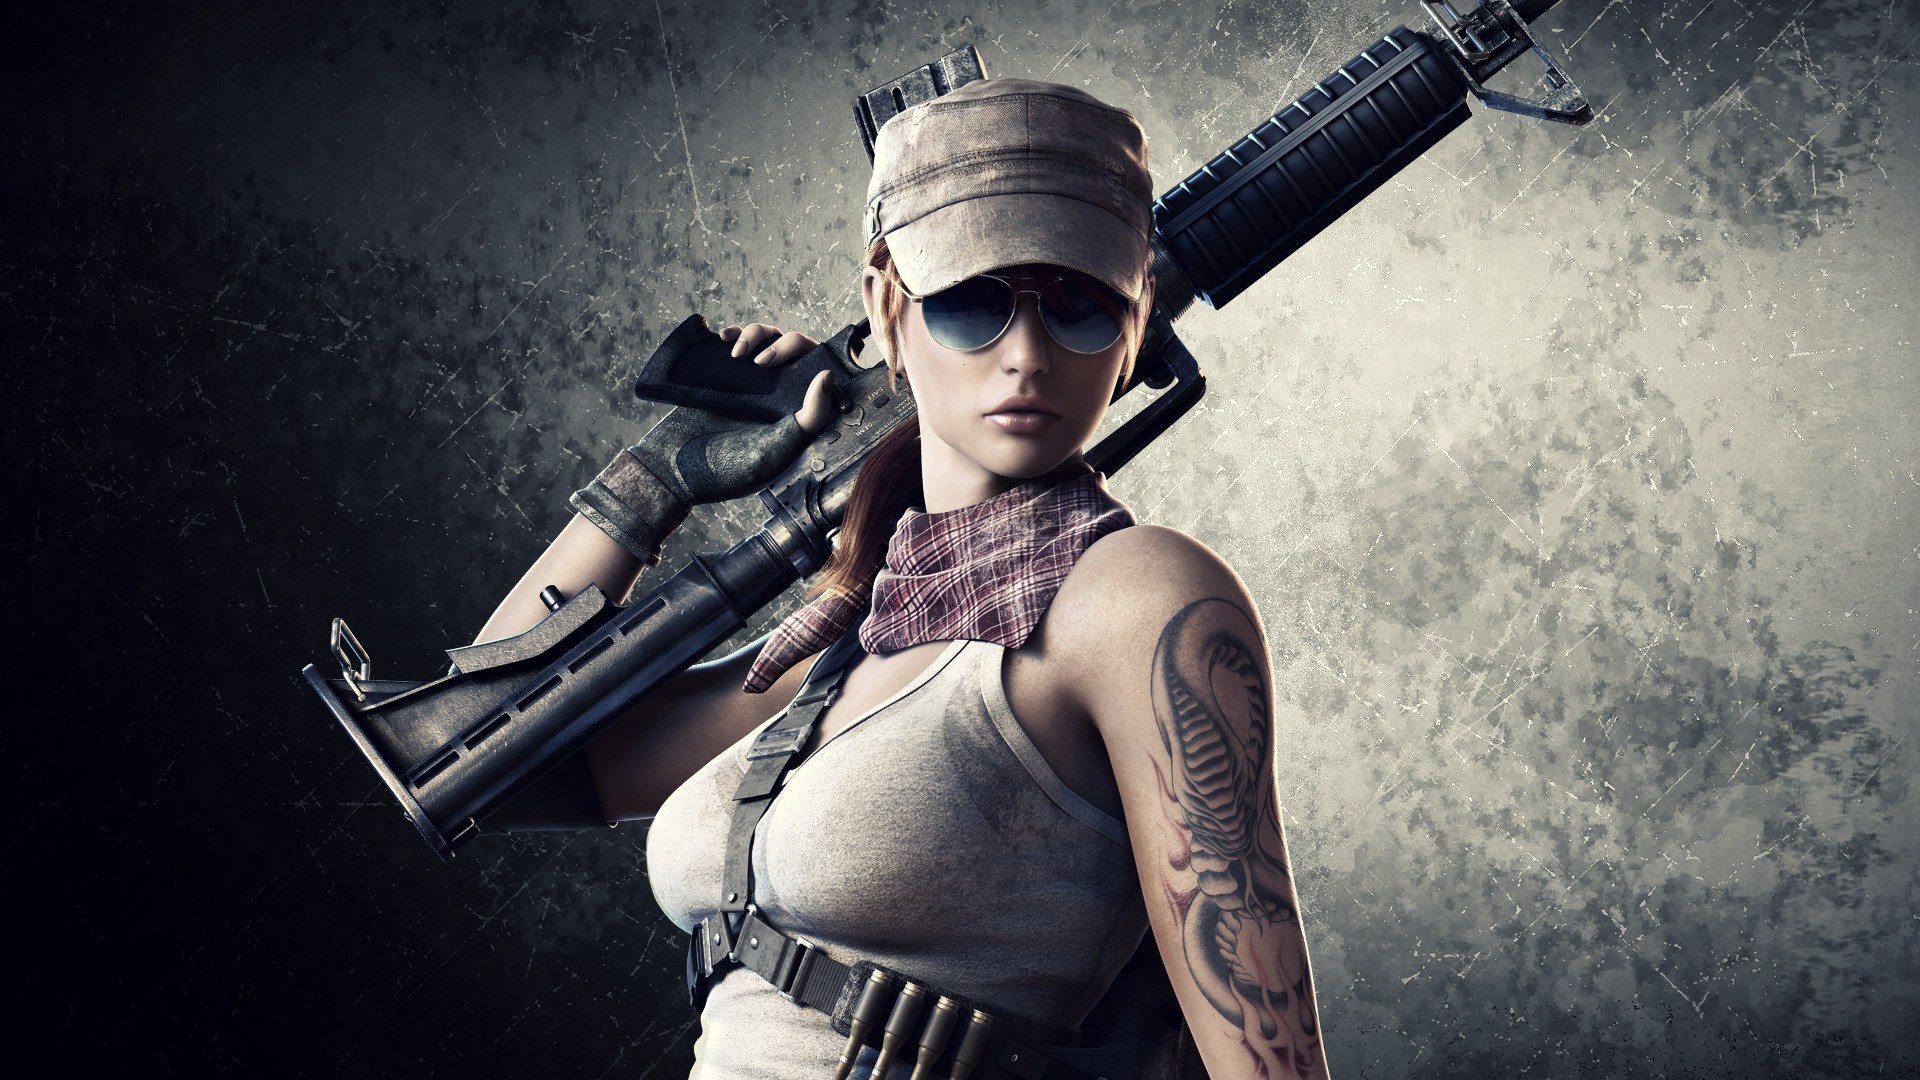 1920x1080 Tattoos Sunglasses Rifle Hat C-g Weapons Weapon Sexy Babe Girl Wallpaper At  Dark Wallpapers